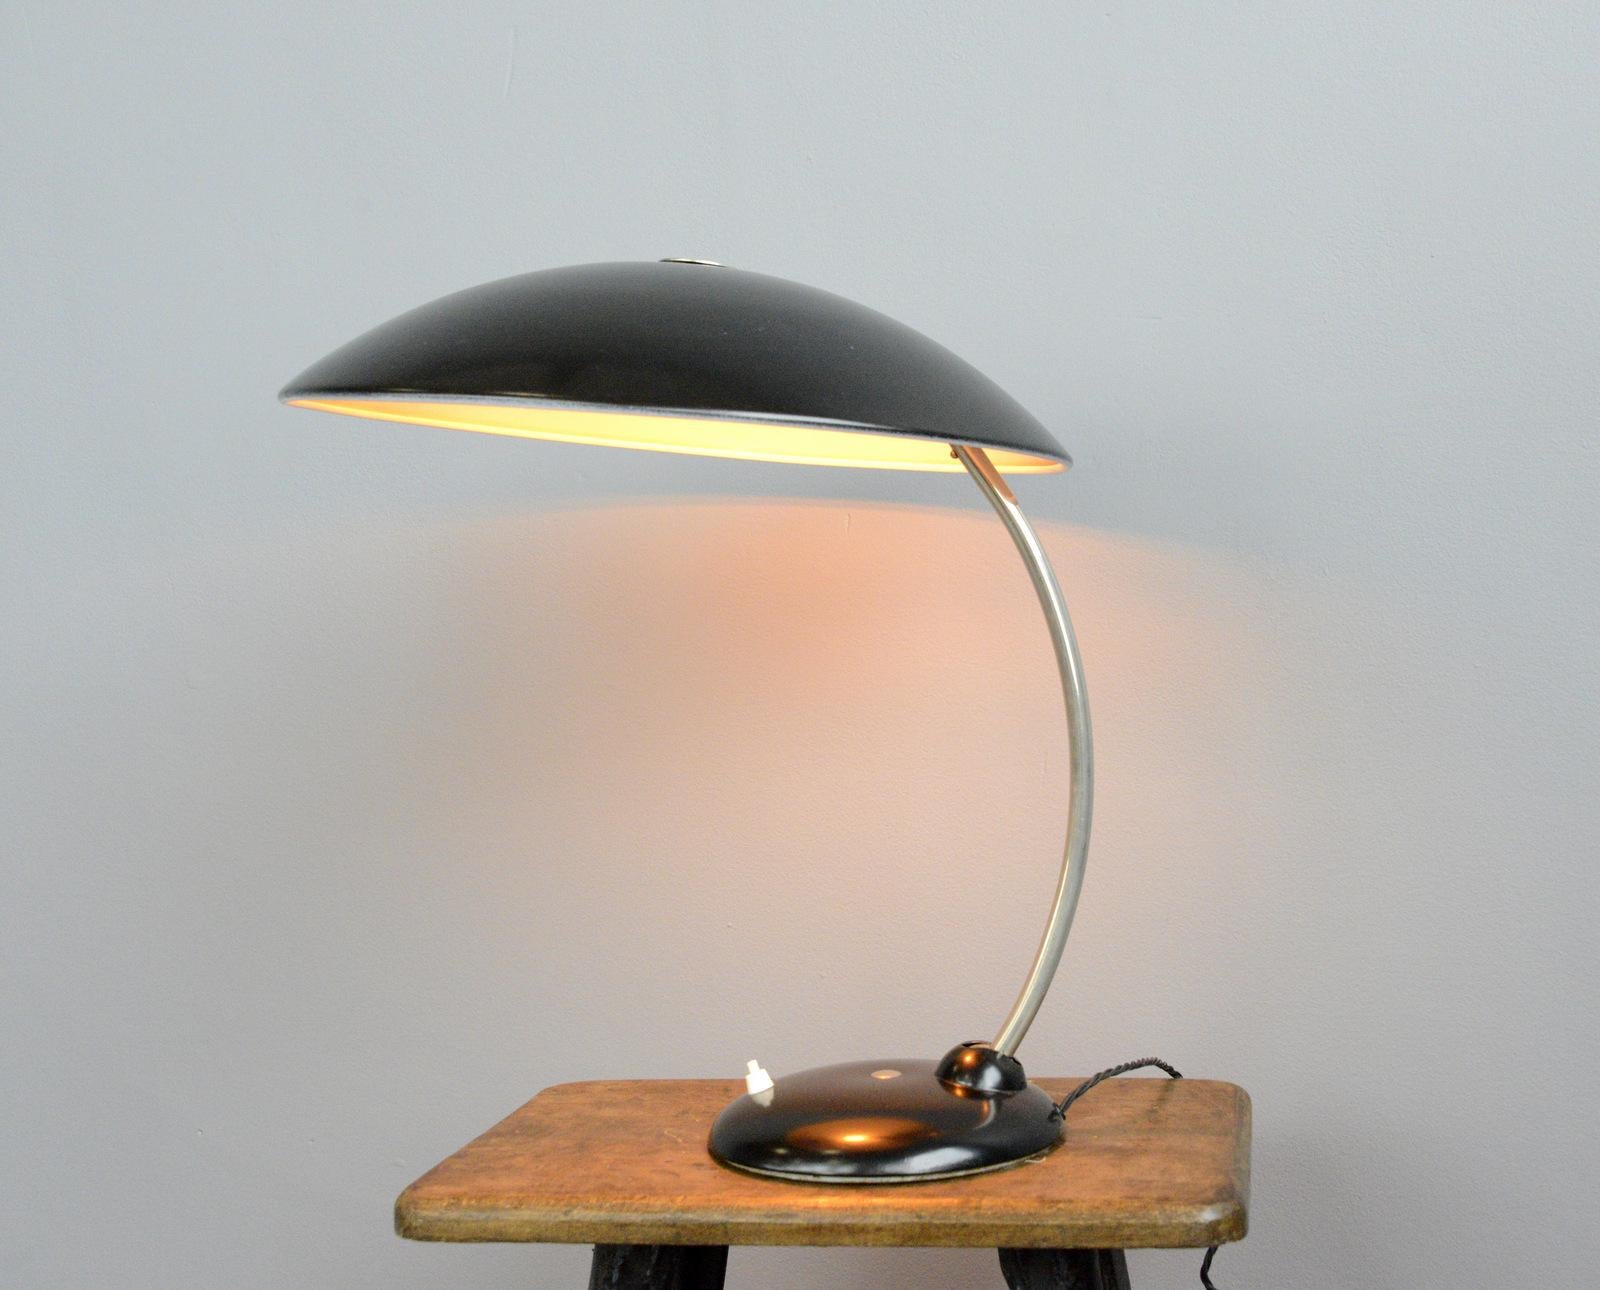 Large table lamp by Hala, circa 1940s

- Aluminium shade with chrome arm
- Switch on the base
- Takes E27 fitting bulbs
- Made by Hannoversche Lampenfabriek (Hala)
- German, 1940s
- Measures: 46cm wide x 46cm tall x 60cm deep

Condition